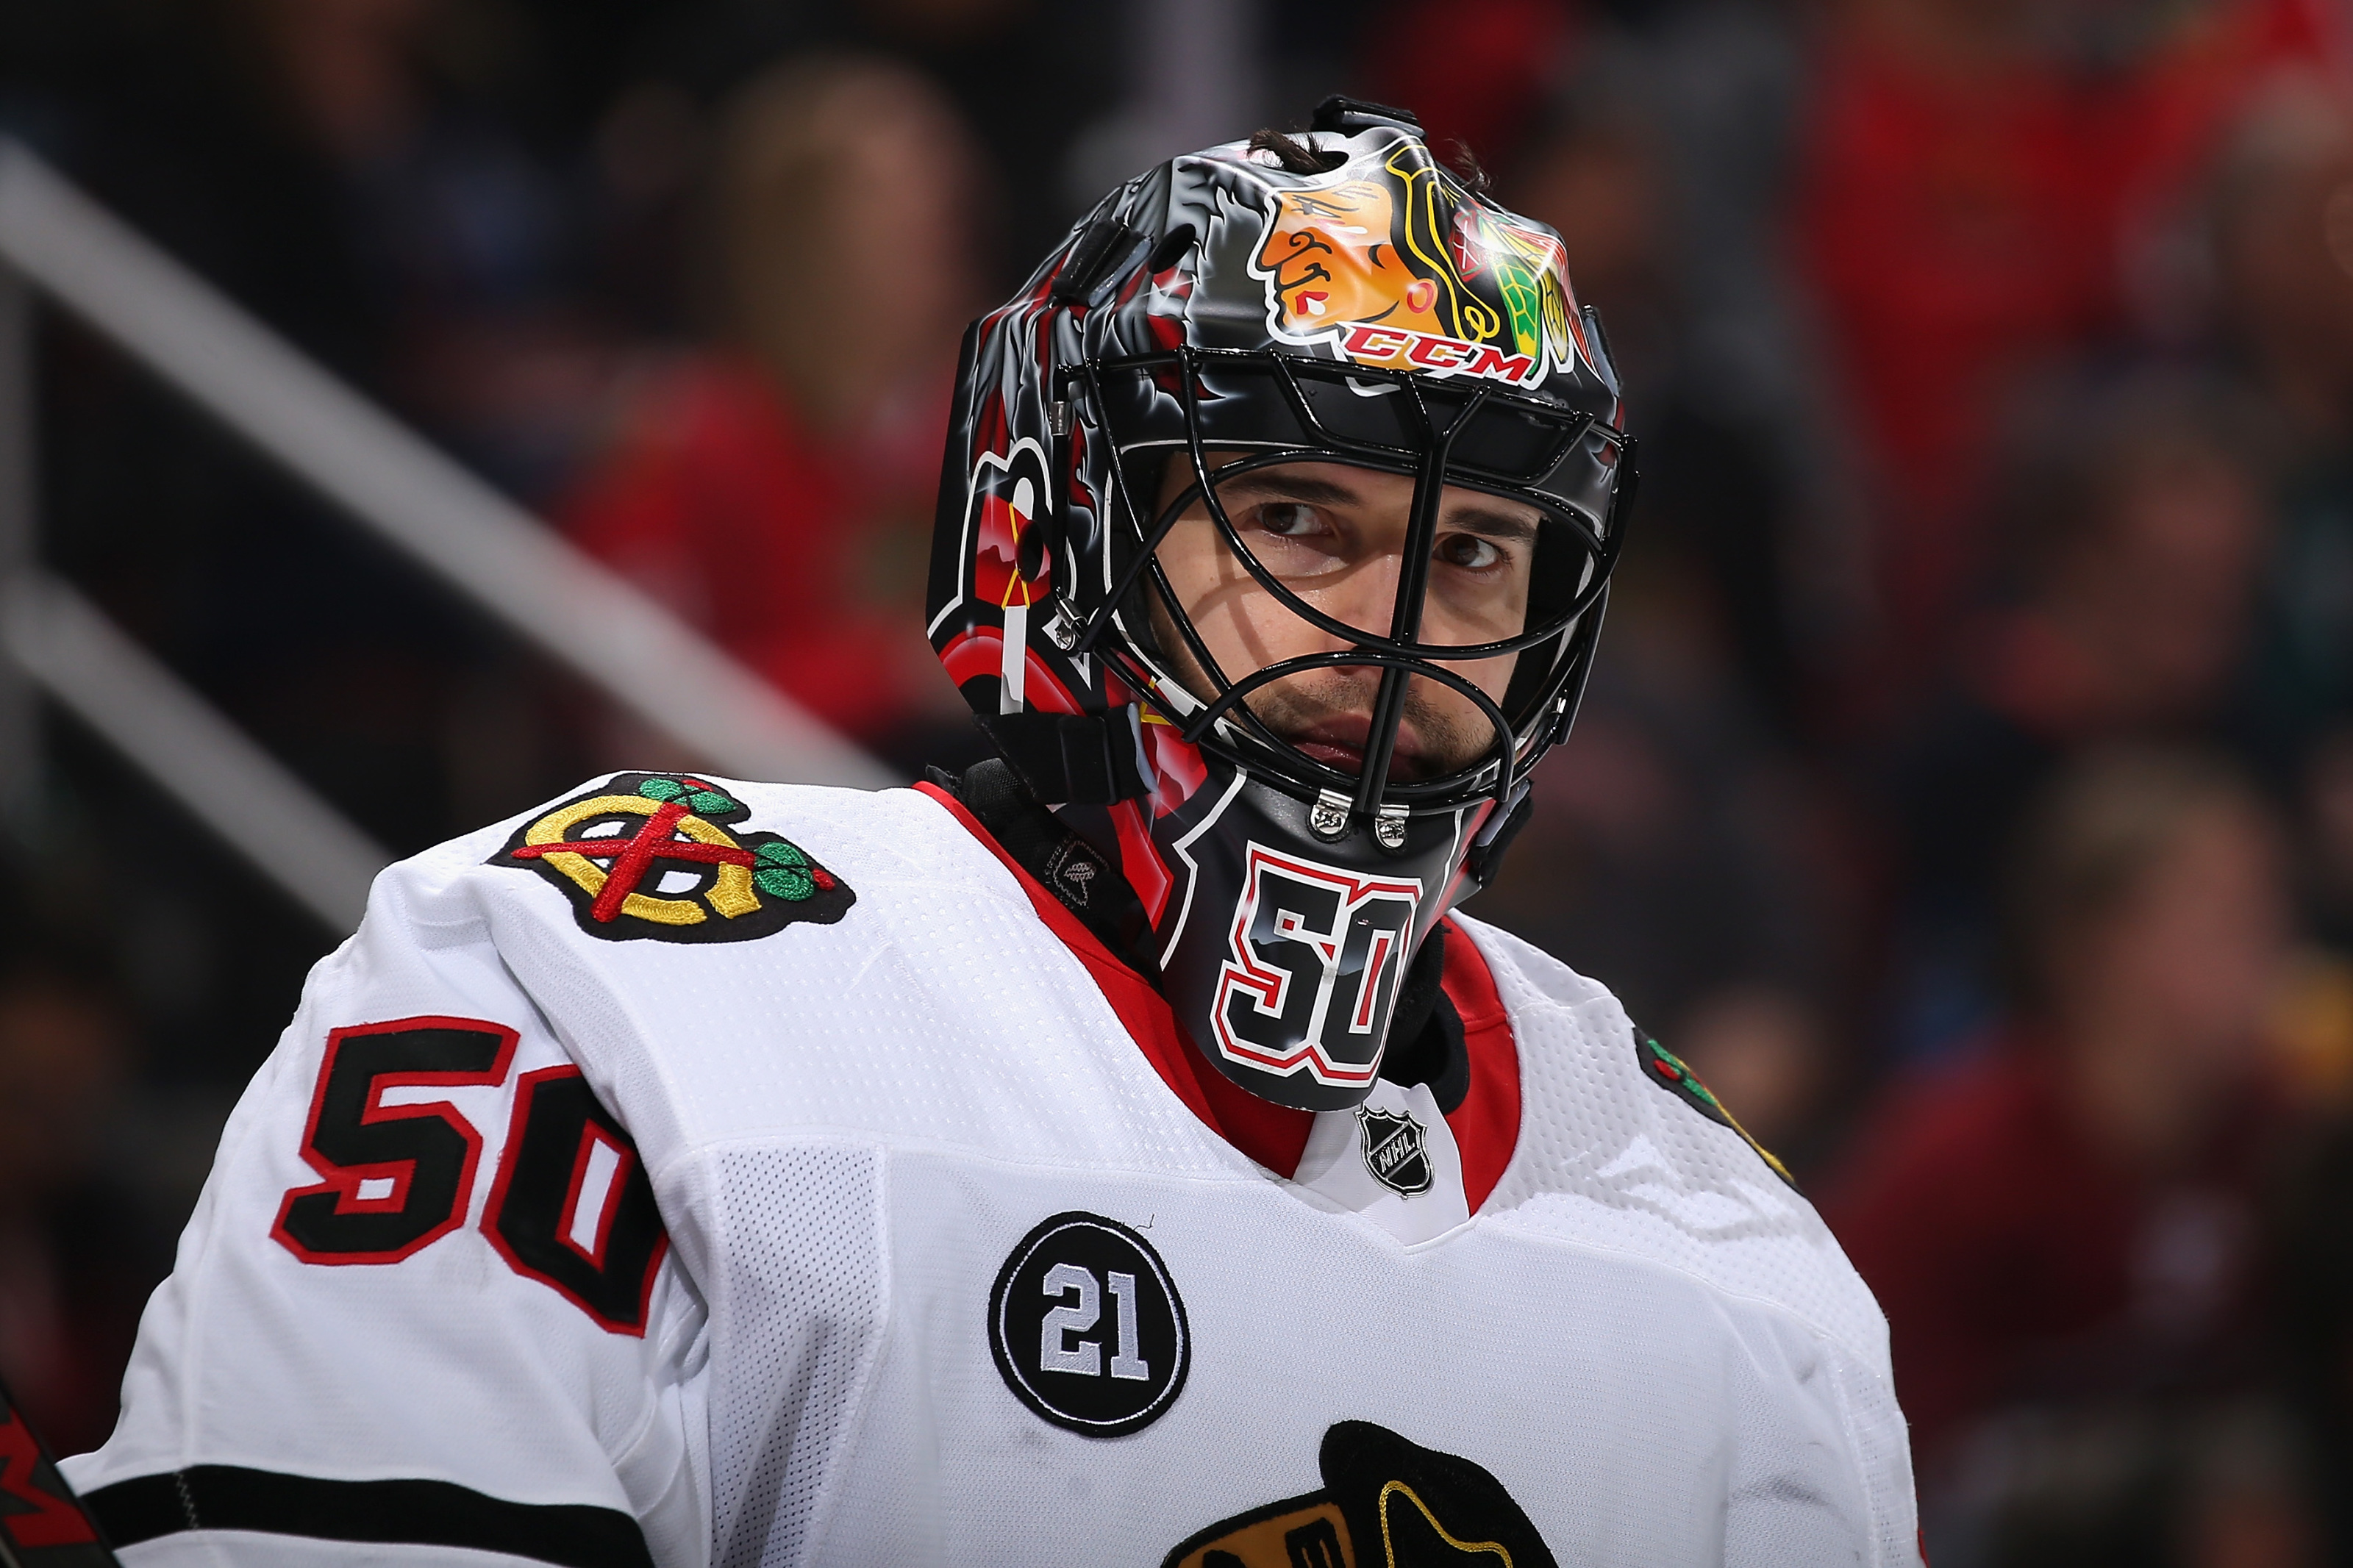 Corey Crawford retires from the NHL (Updated)